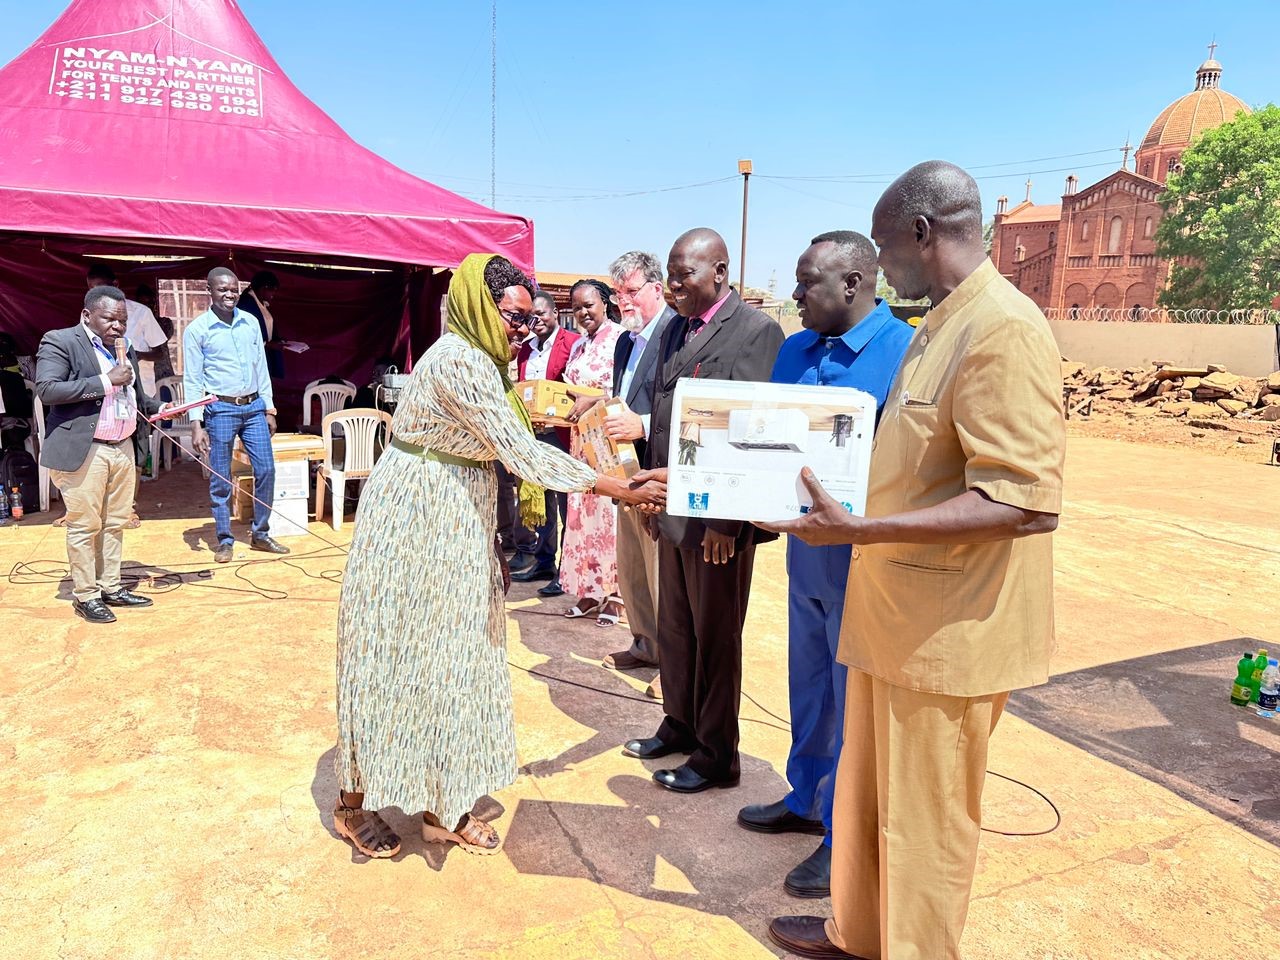 USAID distributes $720,000 in equipment to grass-roots youth groups